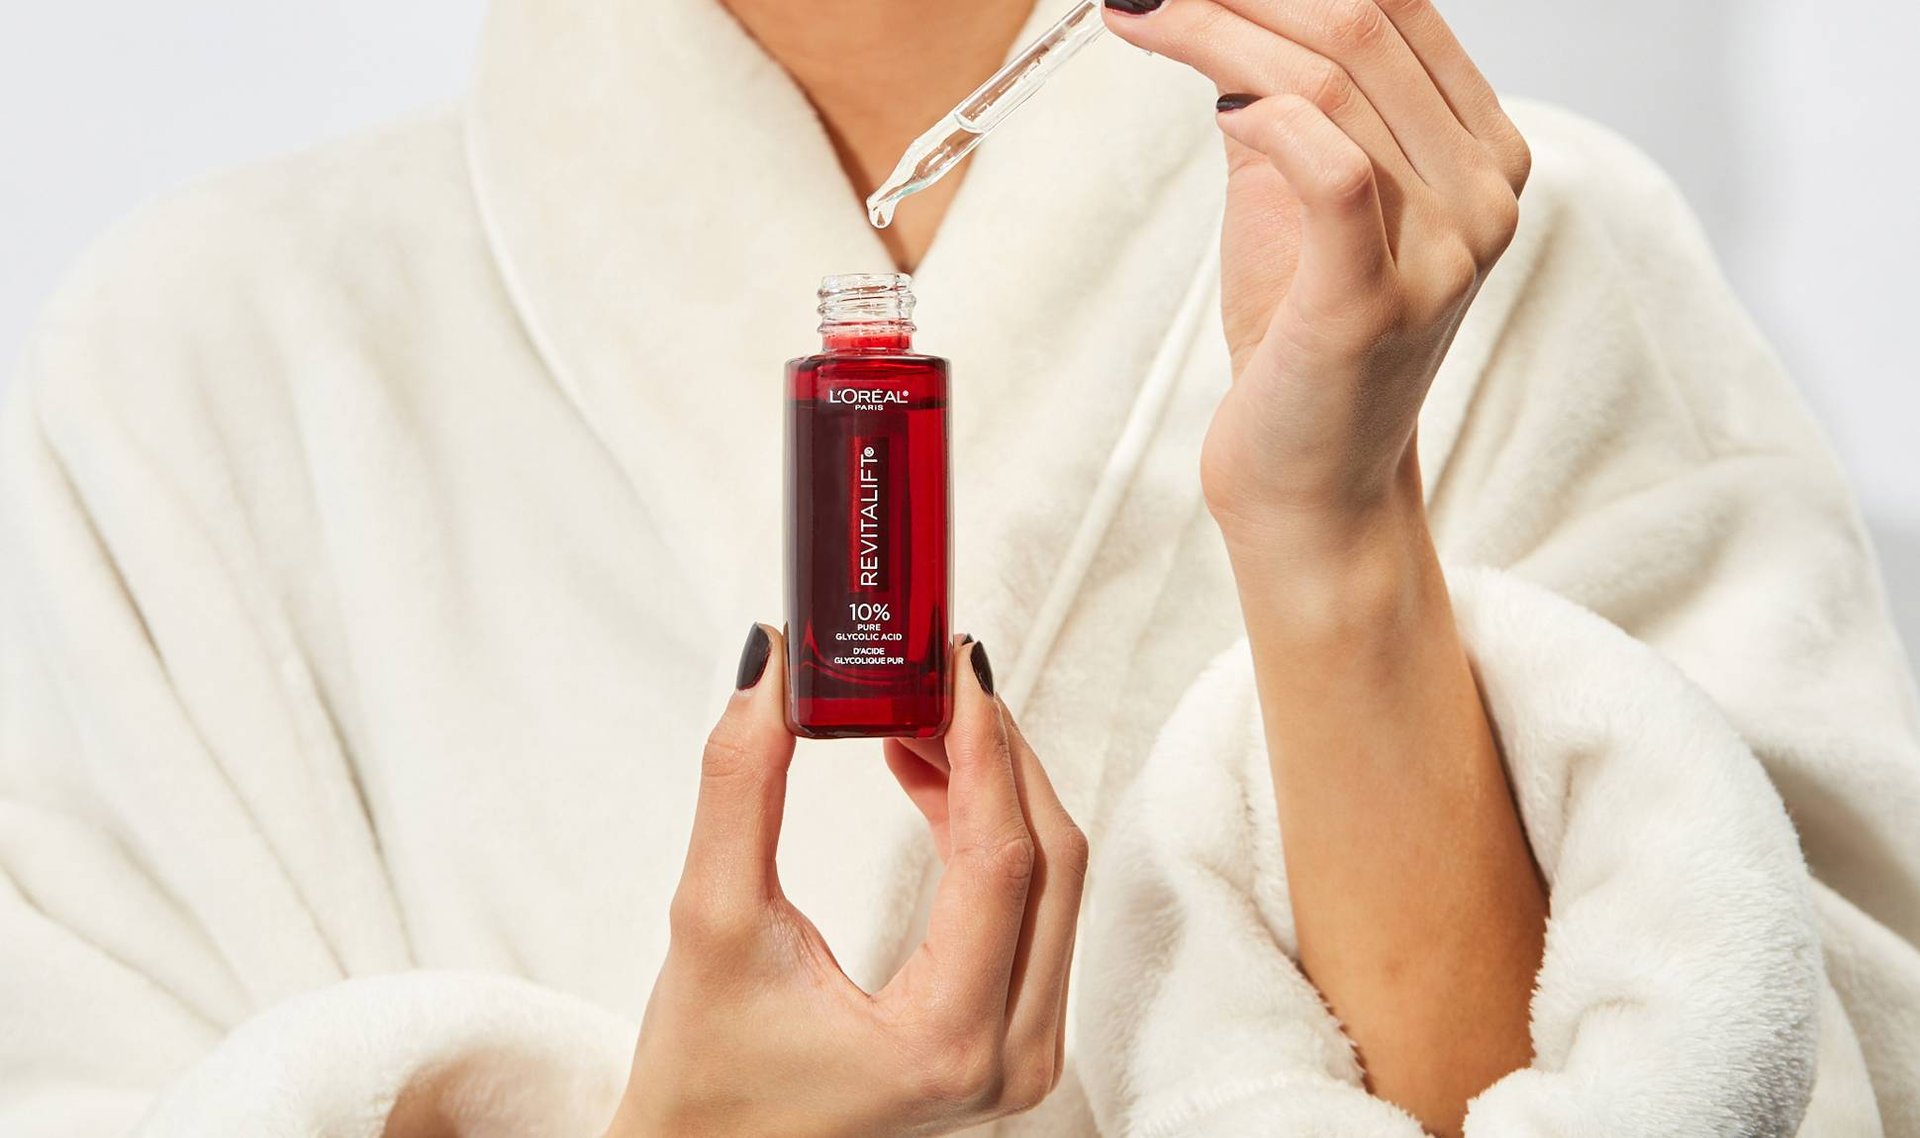 Person wearing a robe using a L’Oréal Revitalift product